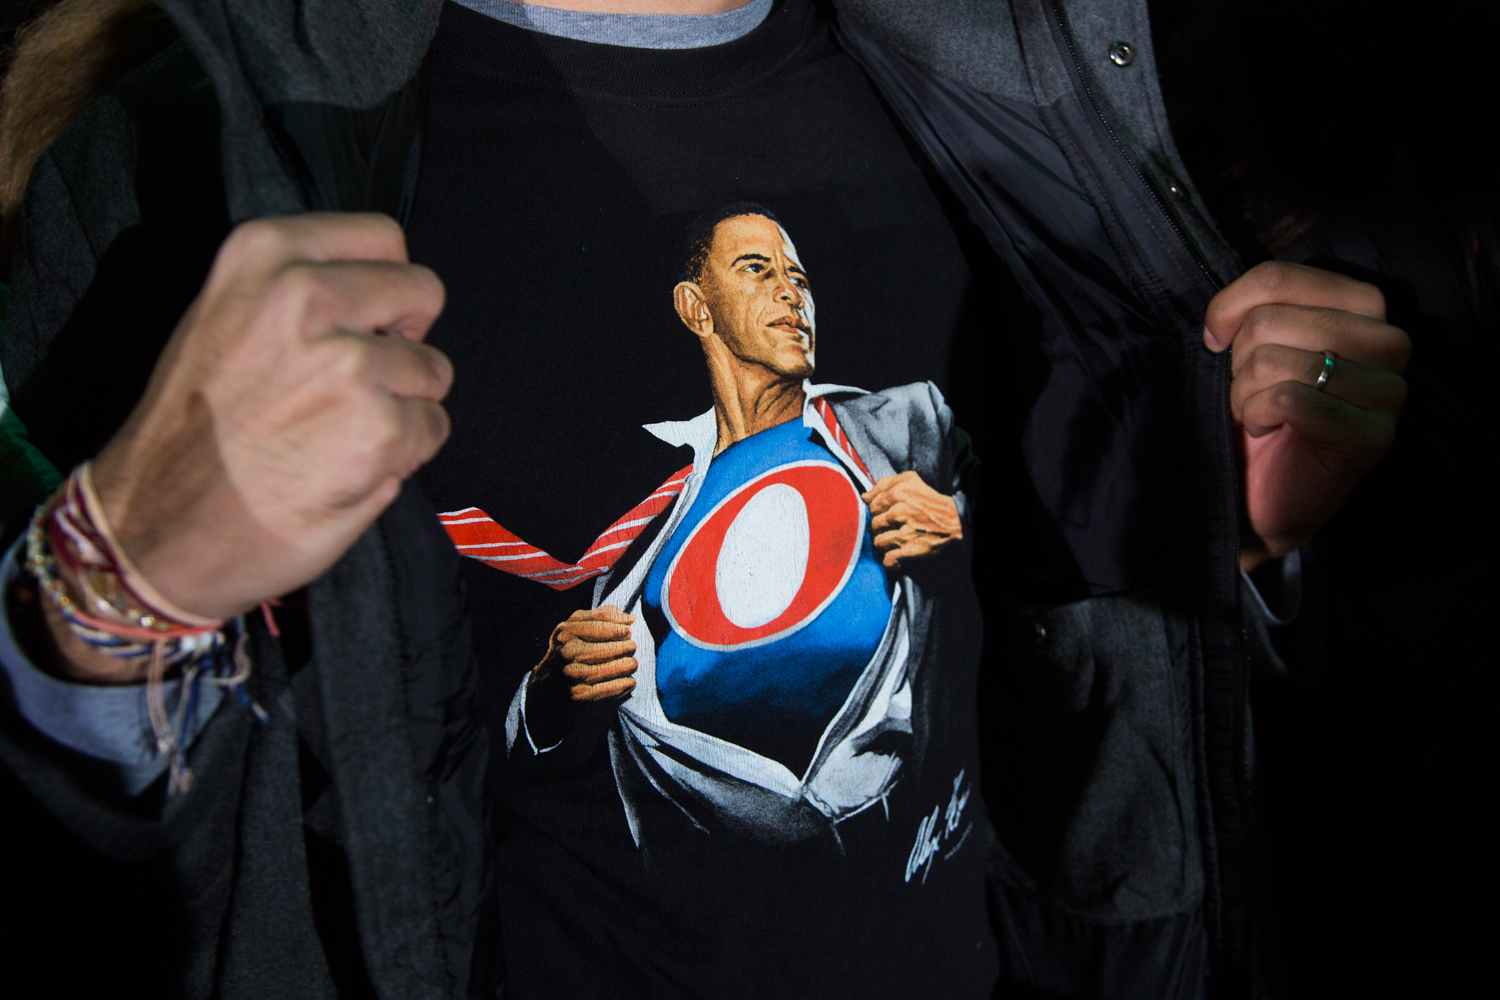 Nov. 2, 2012. A supporter shows off his tee-shirt at a campaign event with President Obama in Hilliard, Ohio.